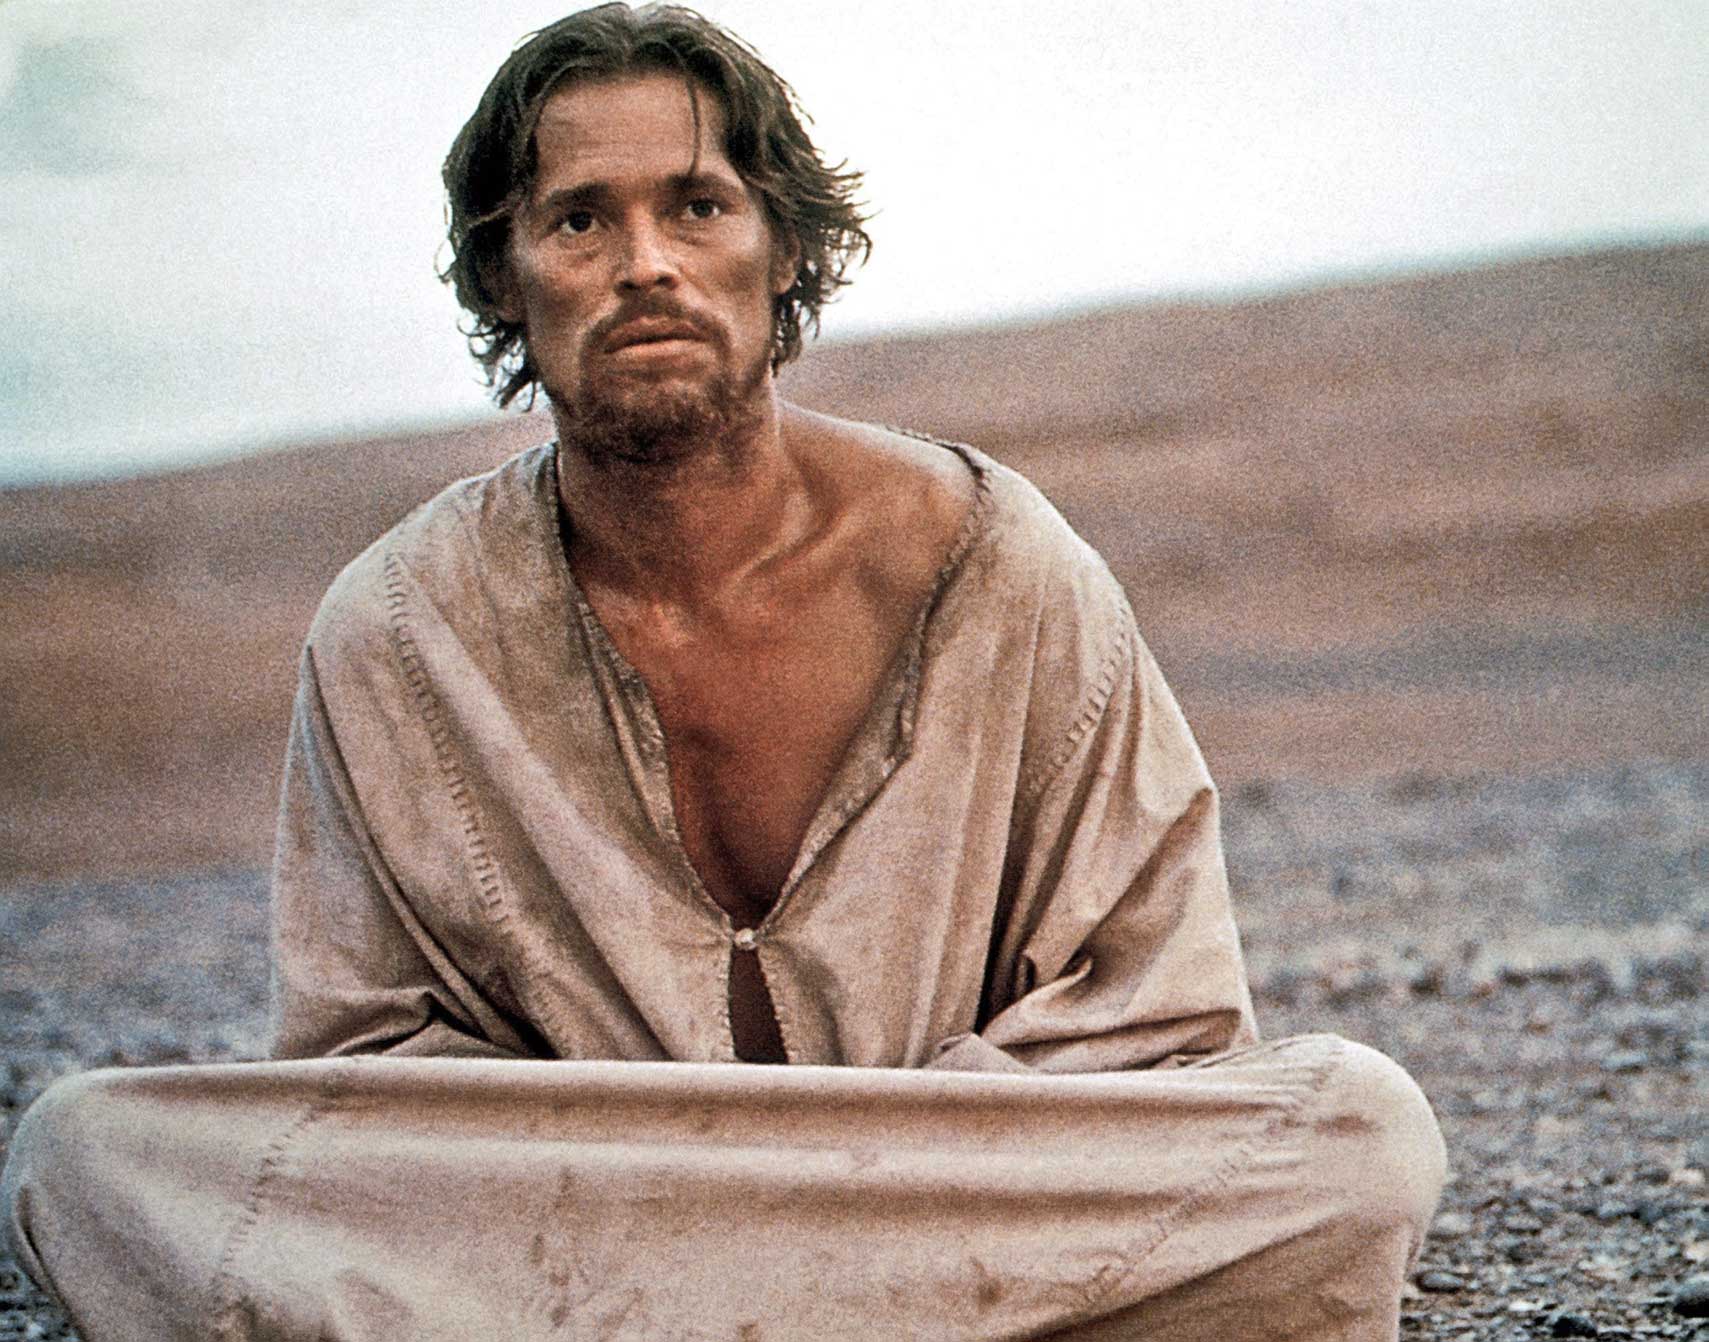 The Last Temptation of Christ (1988)
                              Martin Scorsese’s film starring Willem Dafoe was a critical success, but protests doomed ticket sales